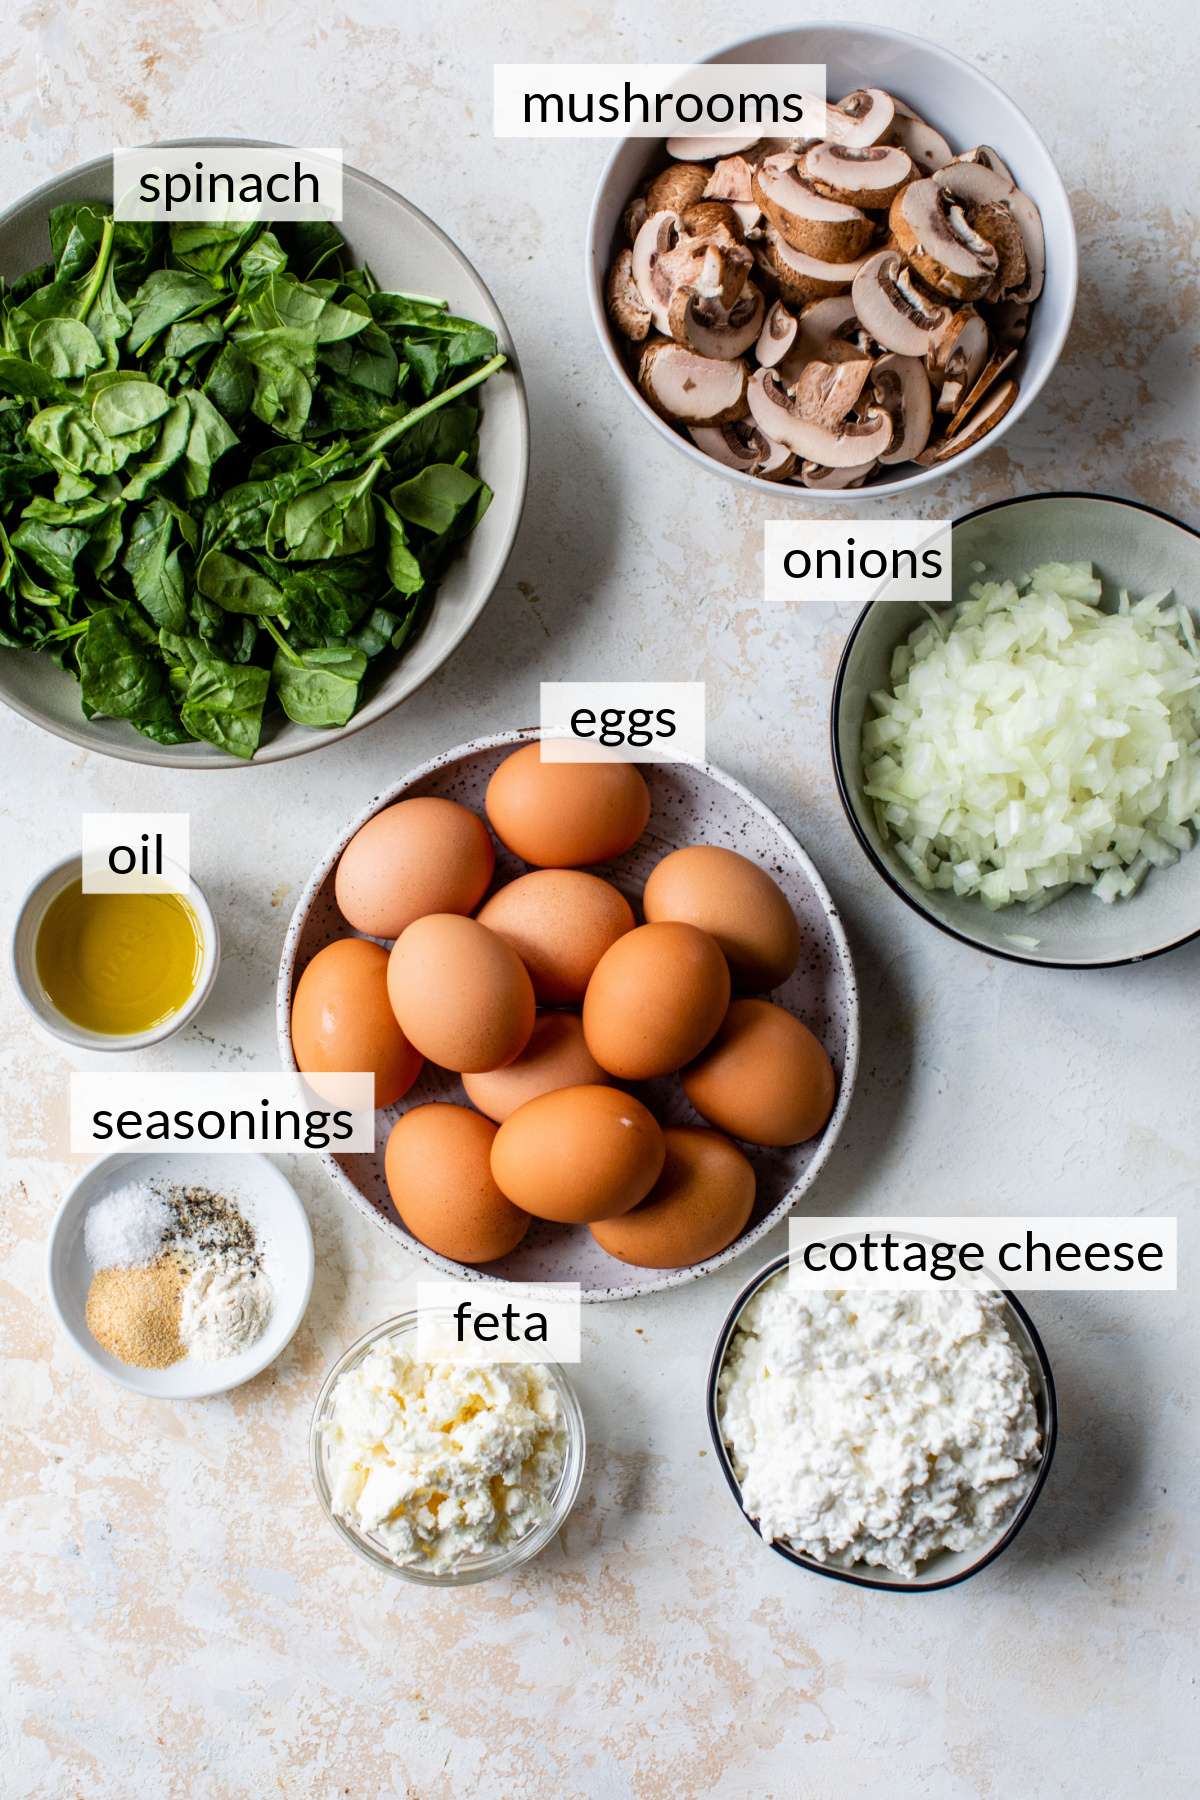 Bowls with eggs, spinach, mushrooms, oil, onions, cottage cheese, feta and seasonings.